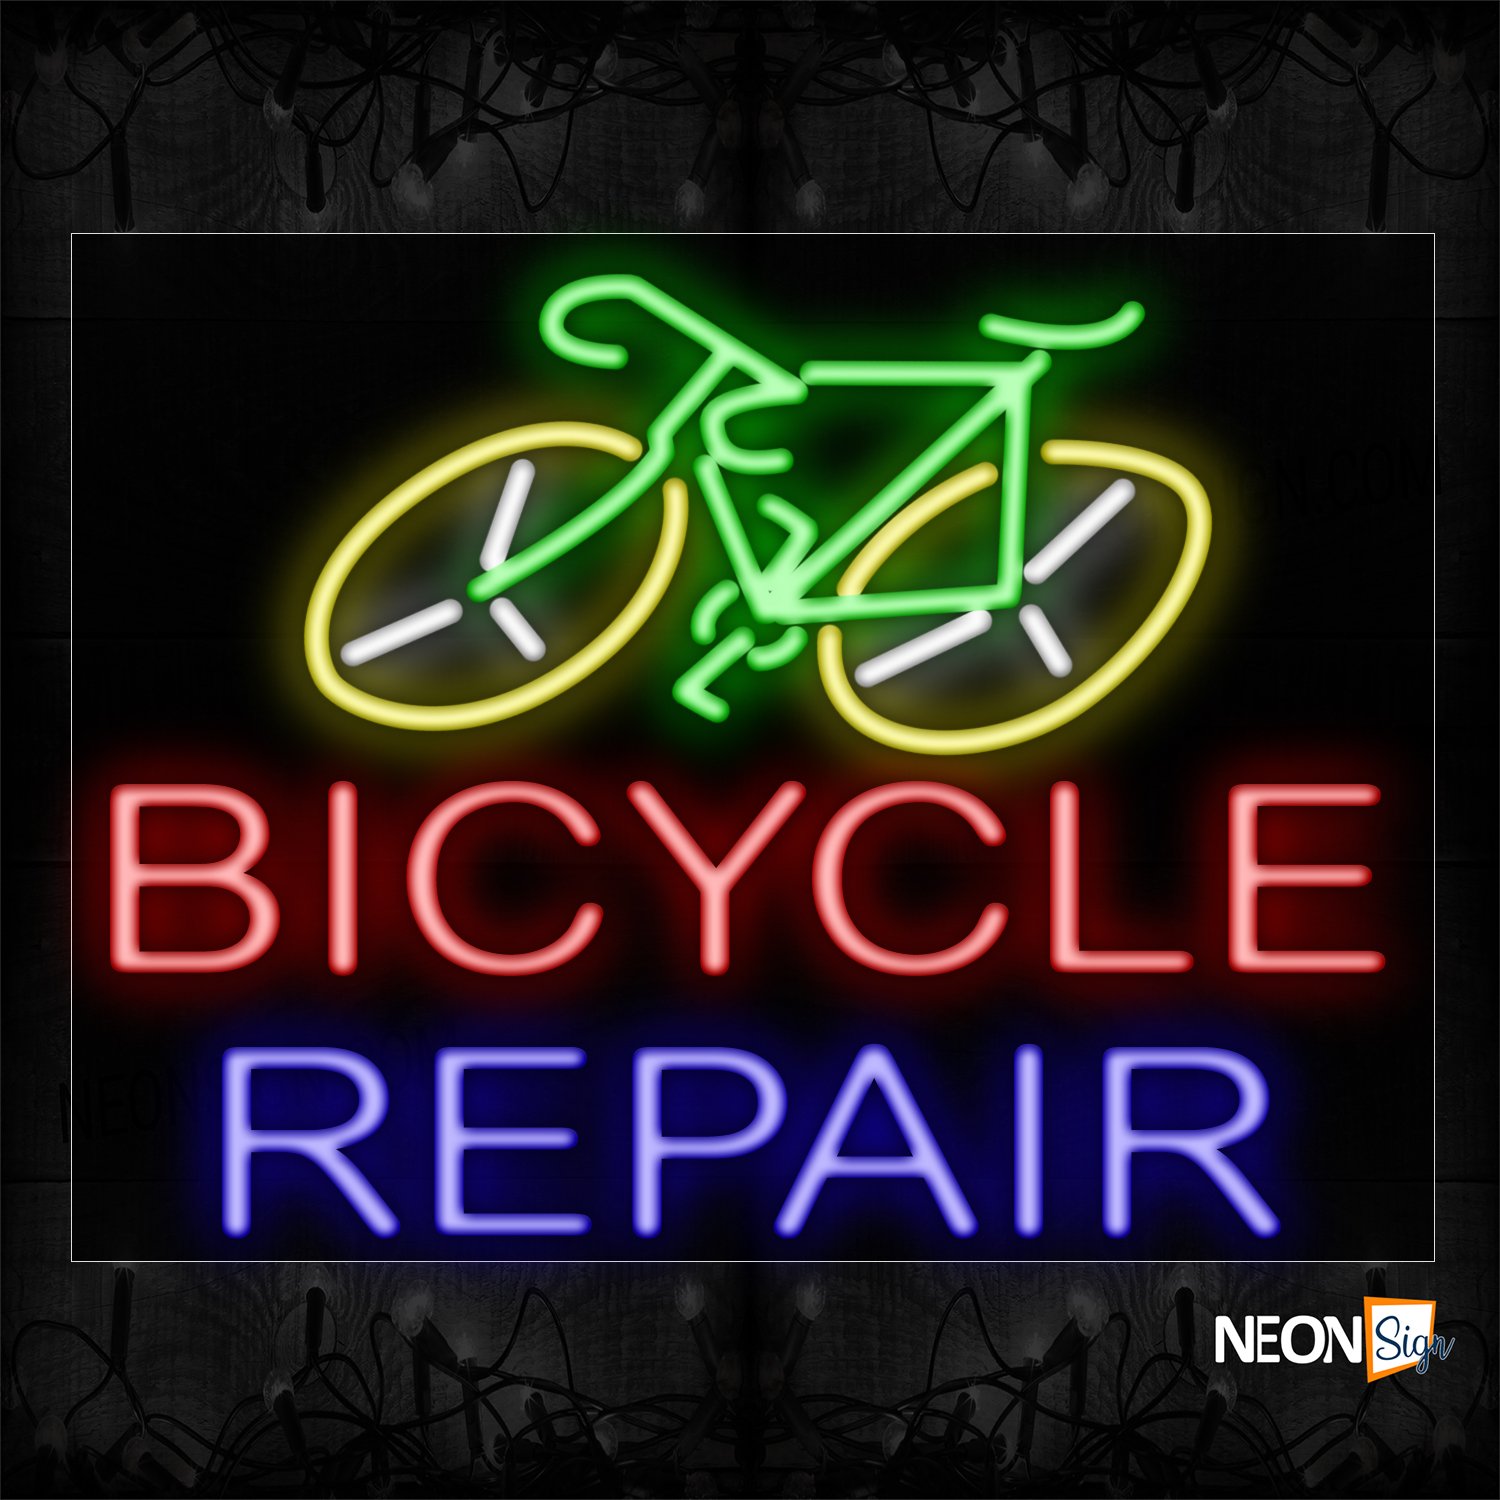 Image of 11662 Bicycle Repair With Logo Neon Sign_24x31 Black Backing